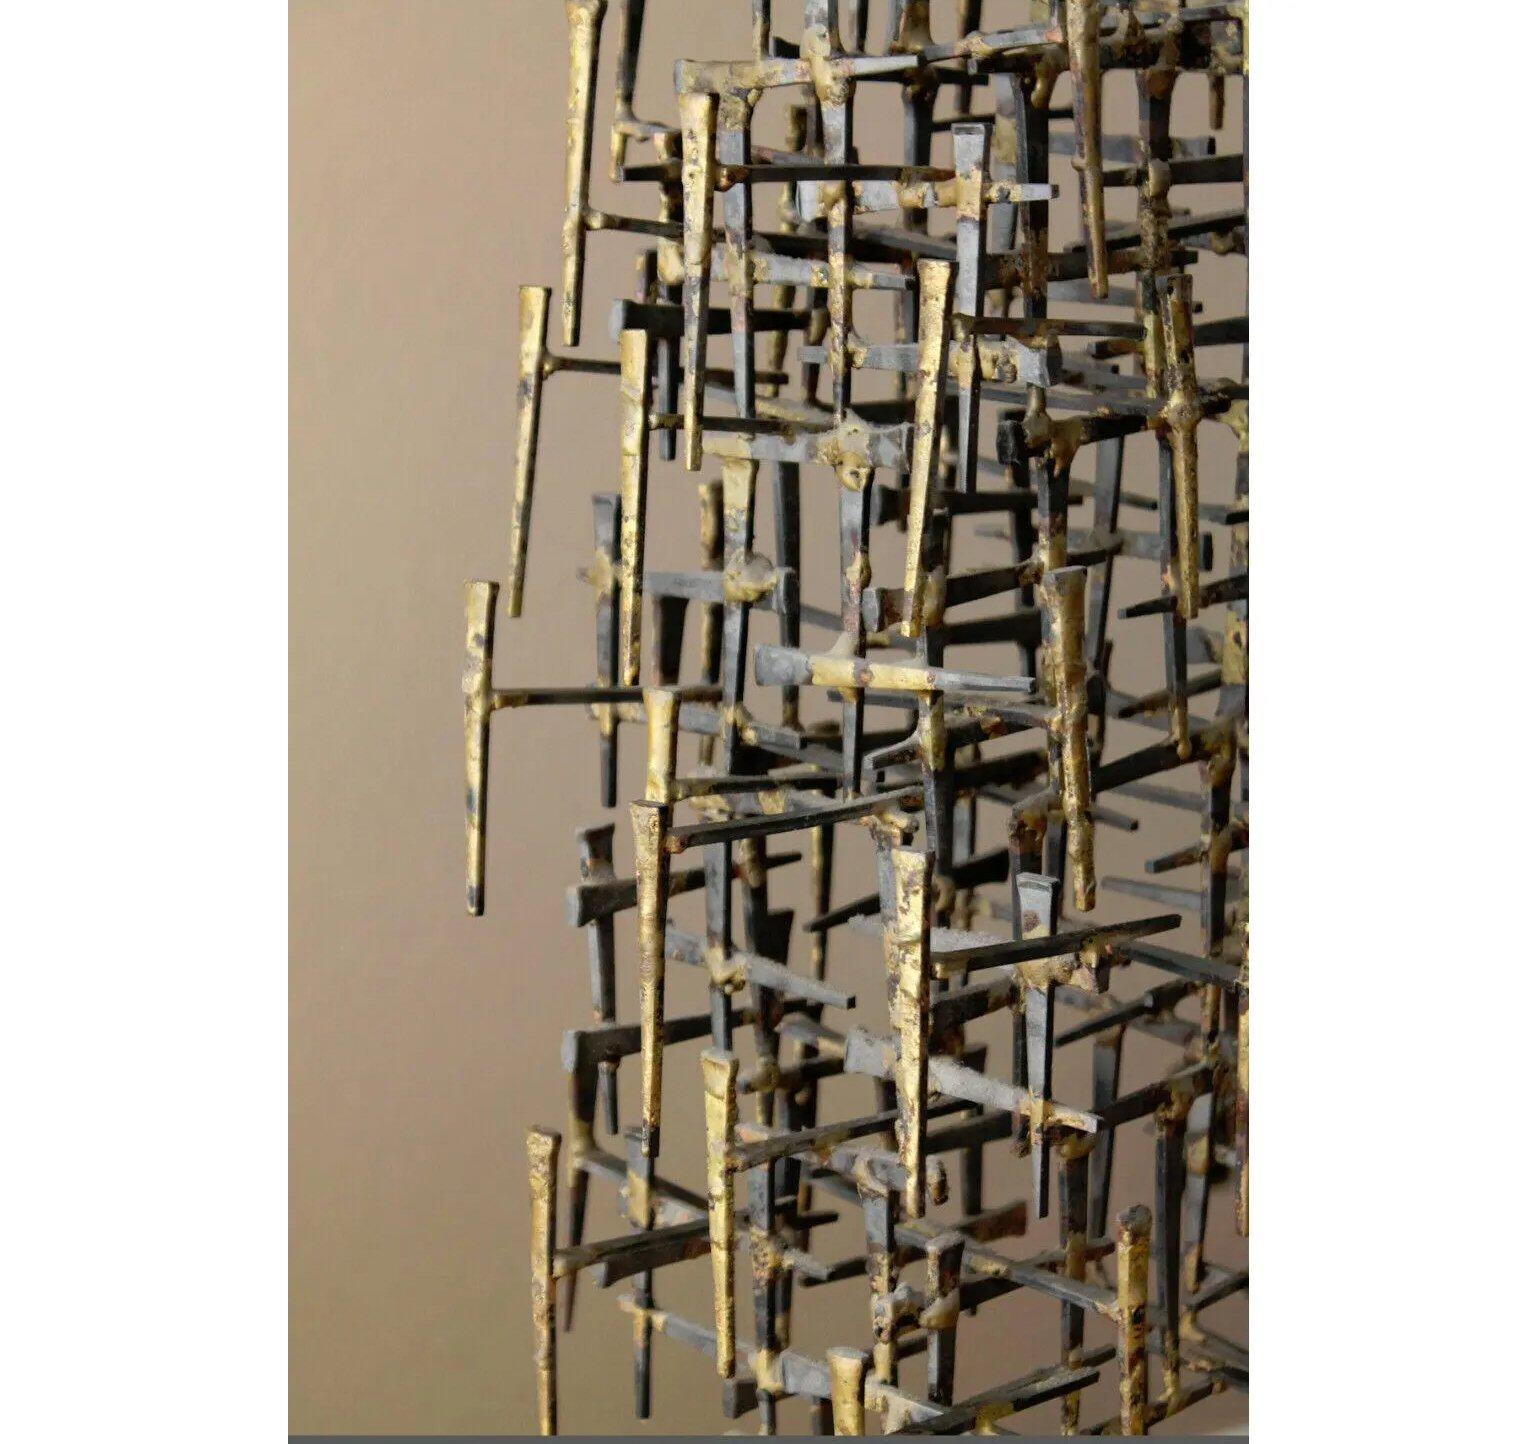 THE BRUTALIST HOLY GRAIL!

MID CENTURY MODERN
MONUMENTAL BRUTALIST FINE ART
DIRECT METAL SCULPTURE!

MAGNIFICENT TOWER STRUCTURE!

IRON, BRASS, BRONZE & WOOD BASE

CIRCA 1956

After Diego Giacometti


Approximate Dimensions: Large 34